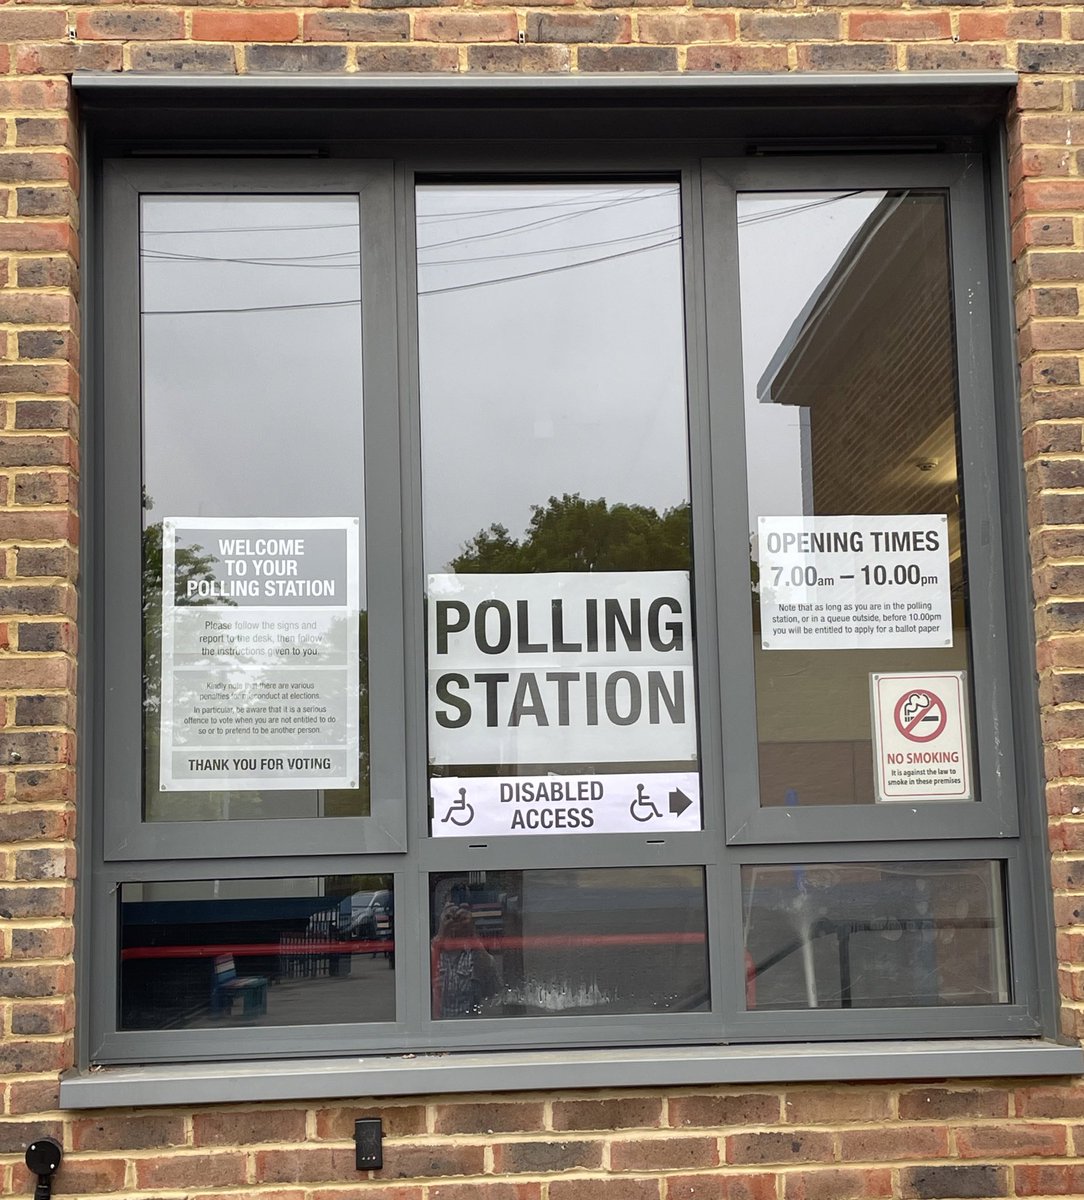 Voted! It’s not too late if you haven’t done it yet. Your vote can make all the difference. Don’t let the Tories off the hook. #VoteSadiq #ToriesUnfitToGovern